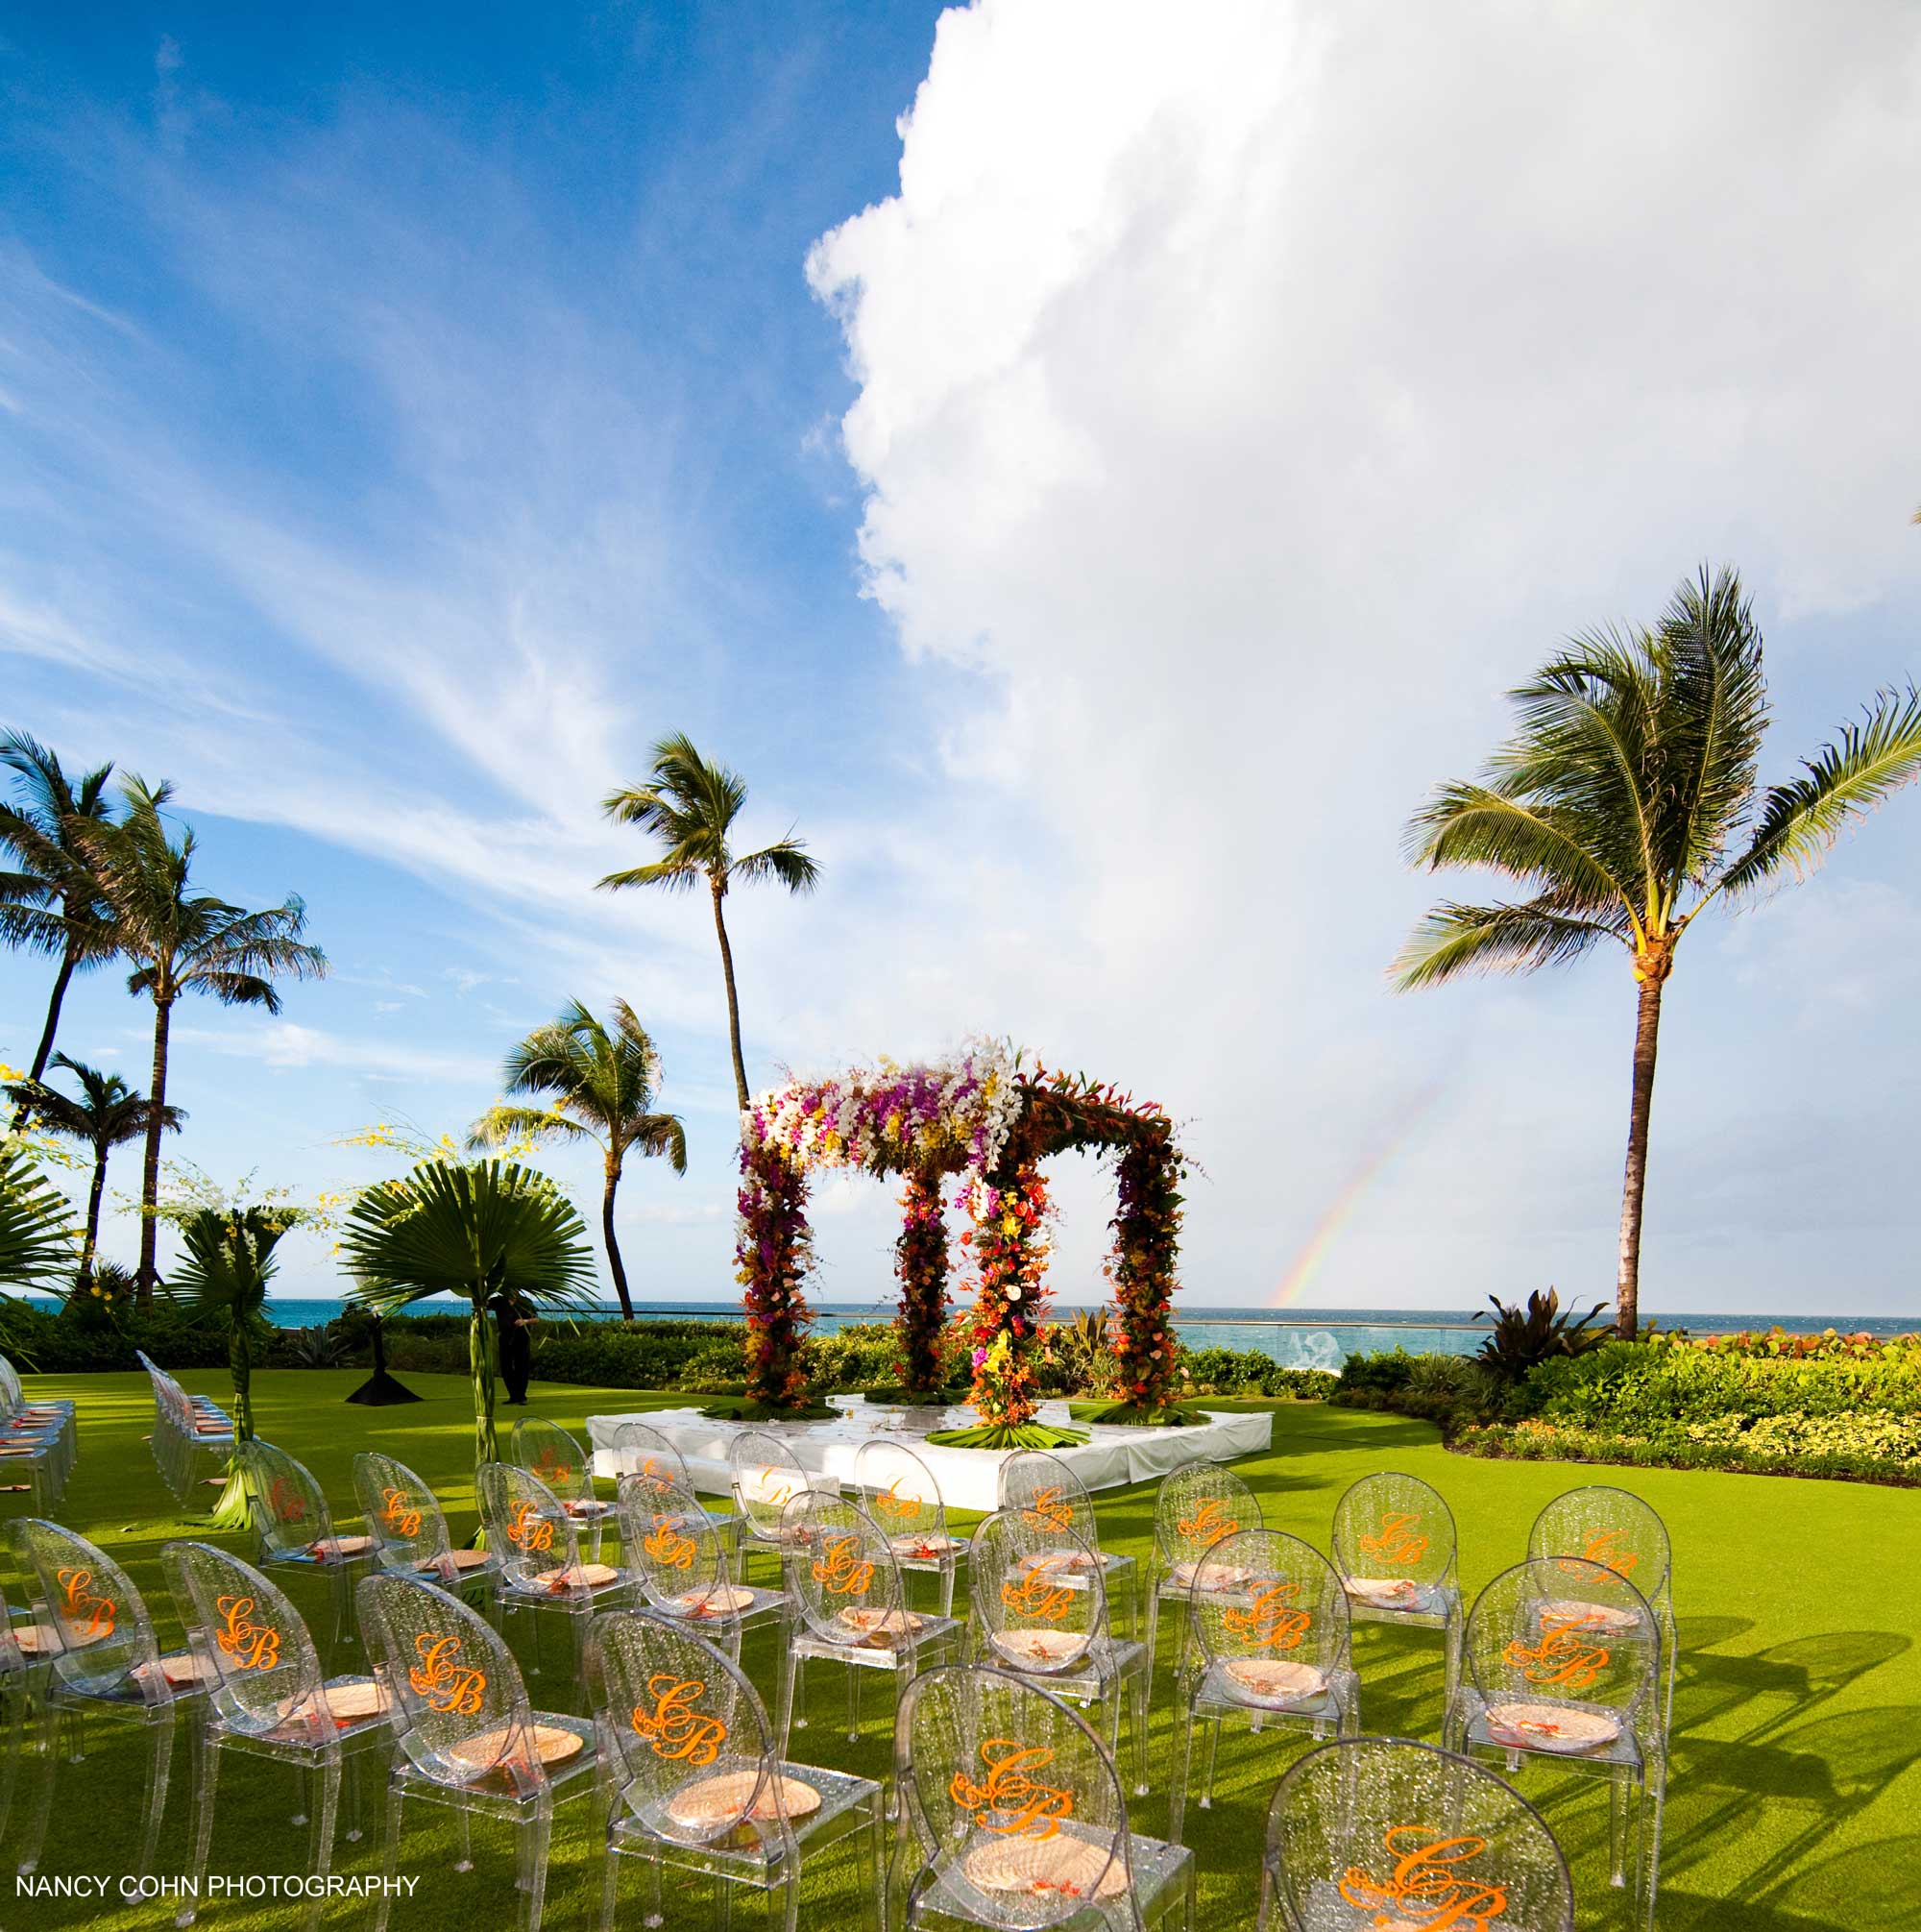 Destination Weddings Venues With Best Views | Unique Places to Get Married | Best Wedding Resorts | Breakers Palm Beach